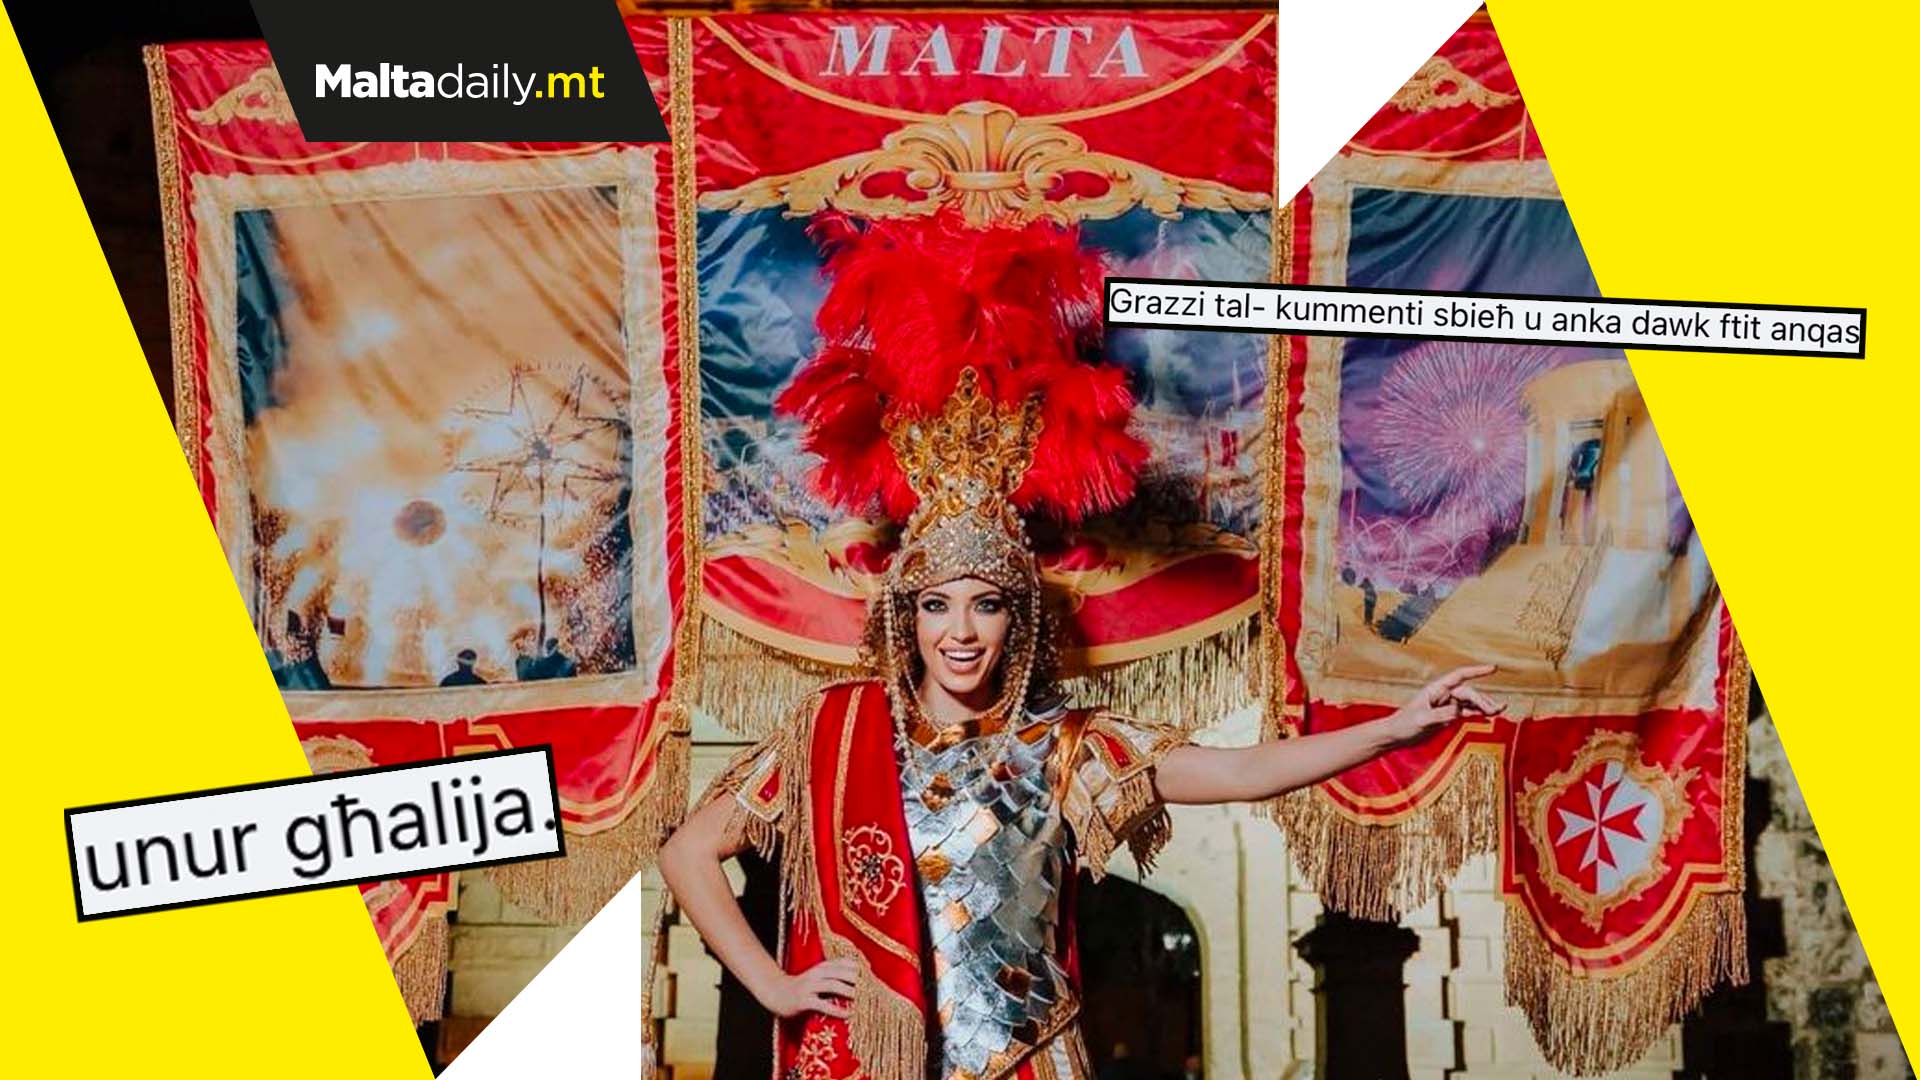 An honour to speak about Maltese culture - Jade Cini responds to costume criticism